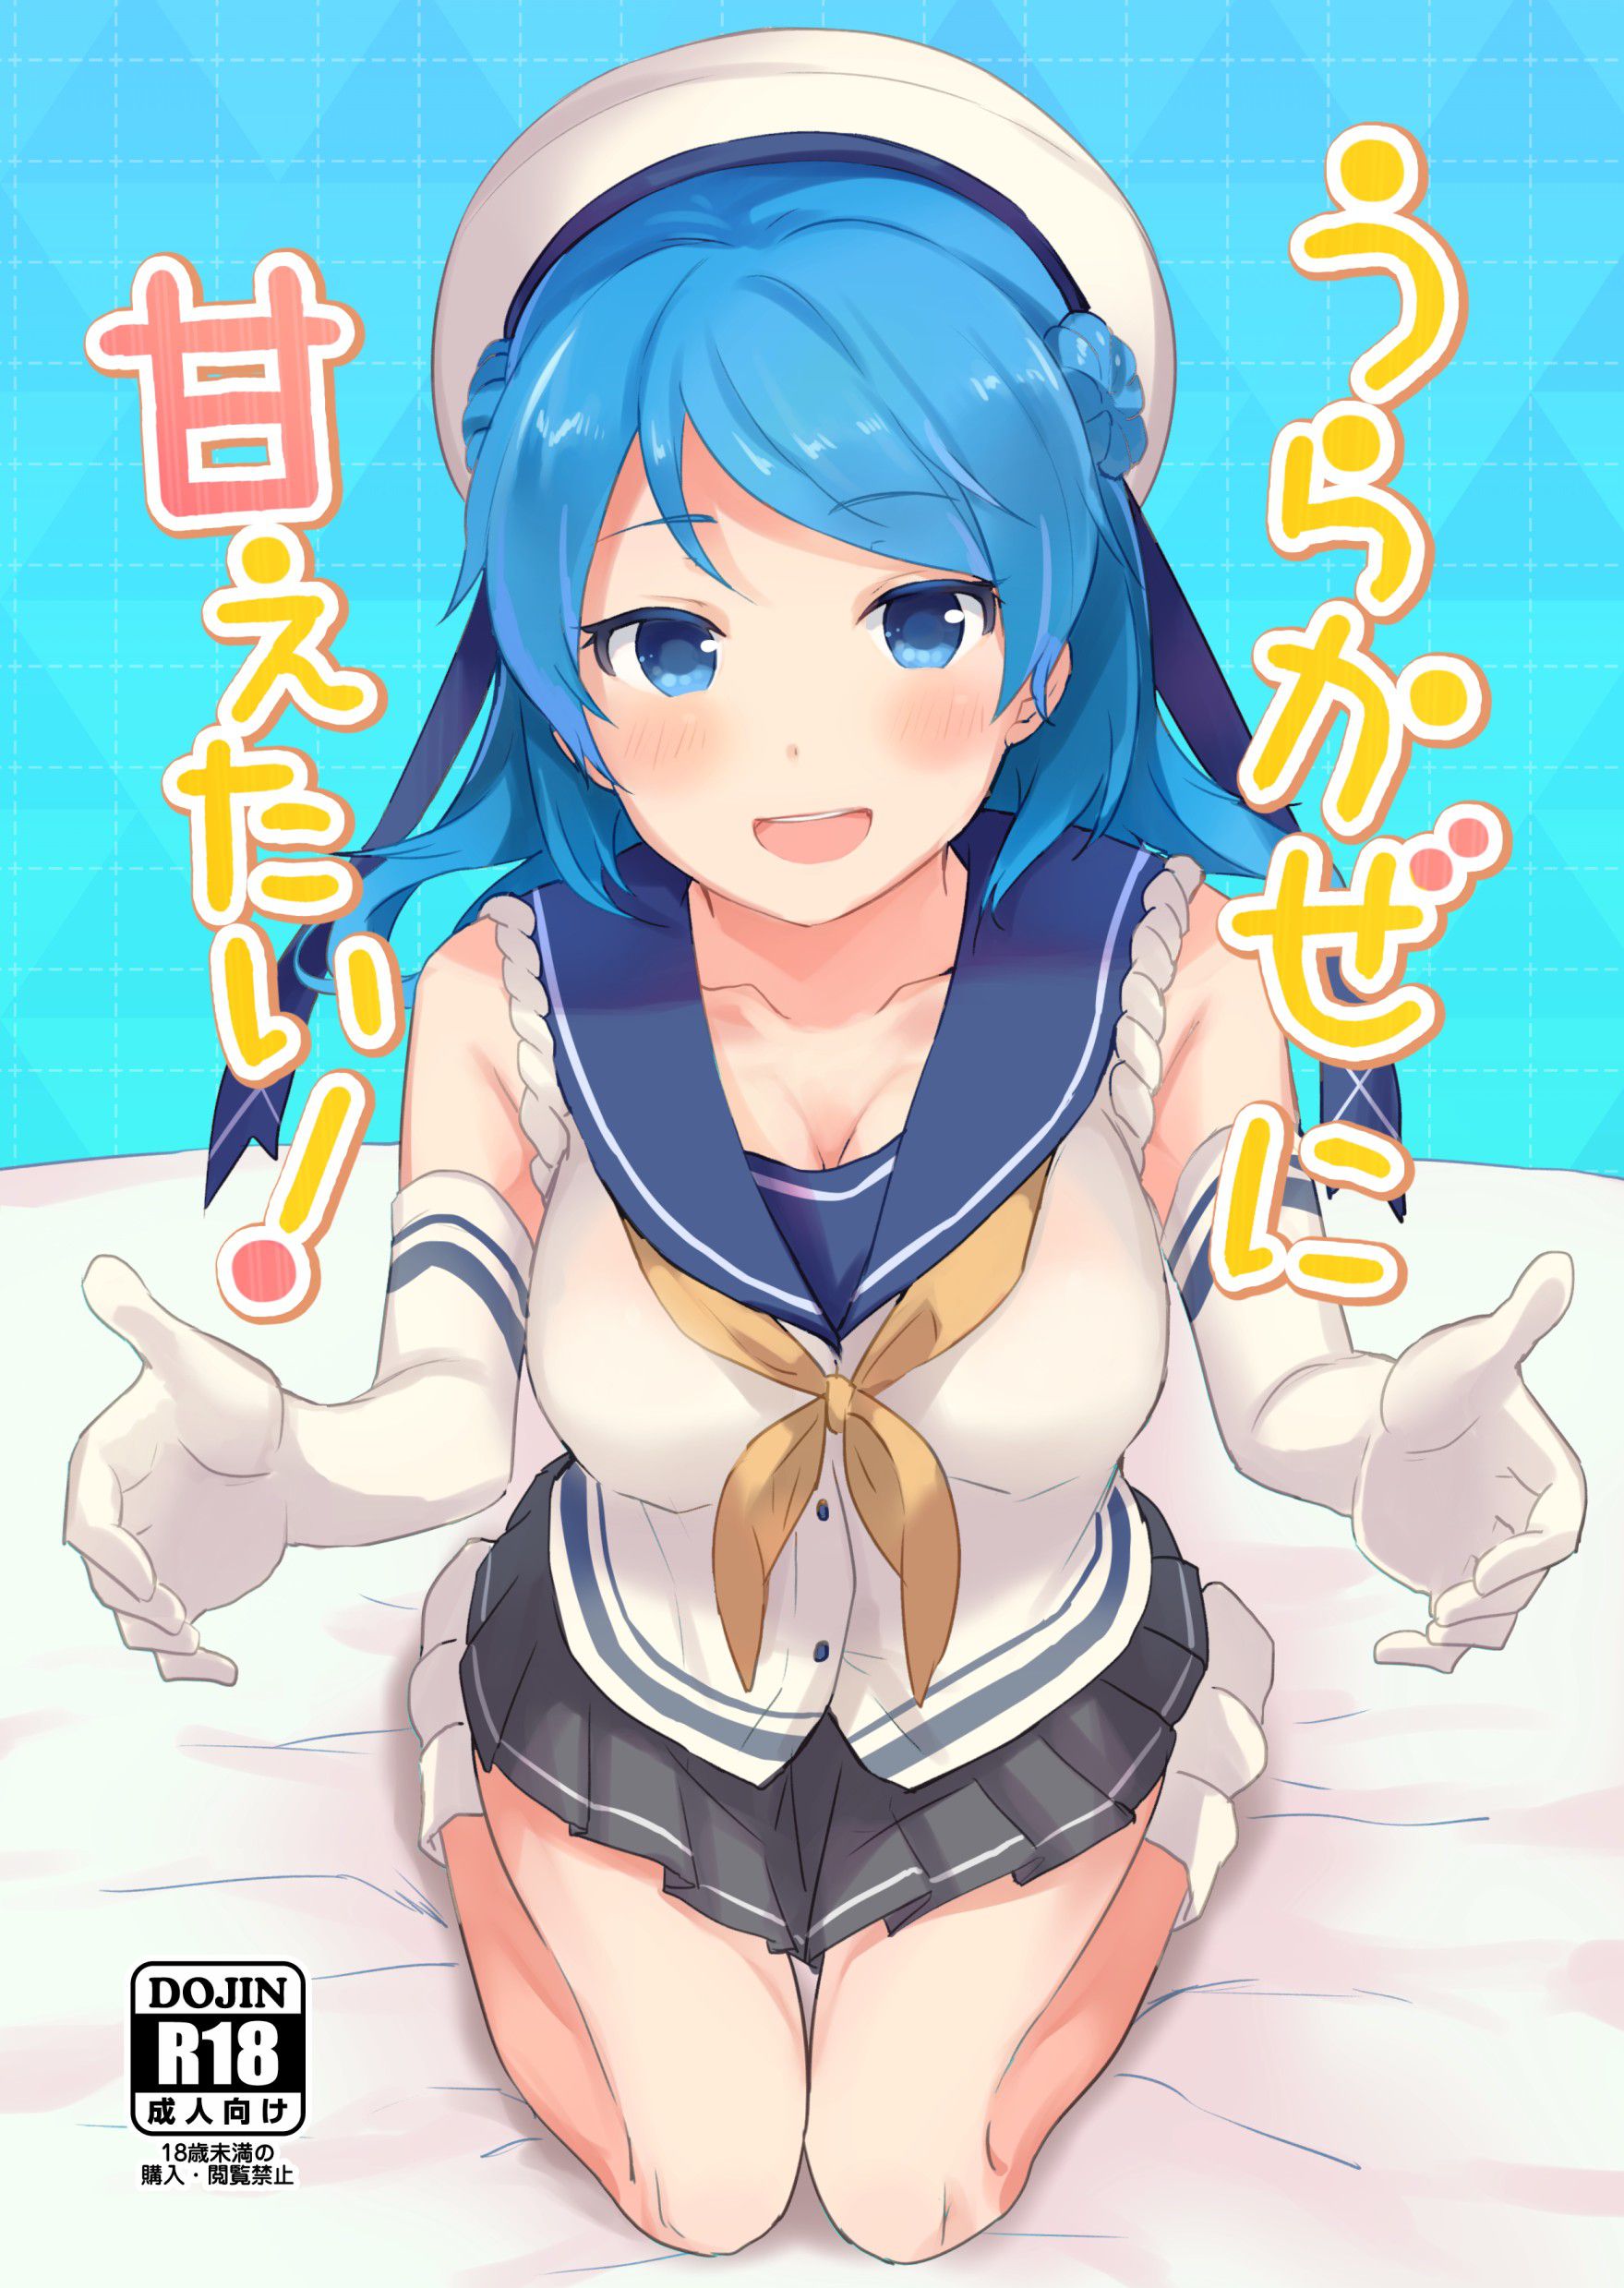 [2nd] Secondary erotic image of a girl with blue or light blue hair Part 18 [ blue hair ] 12